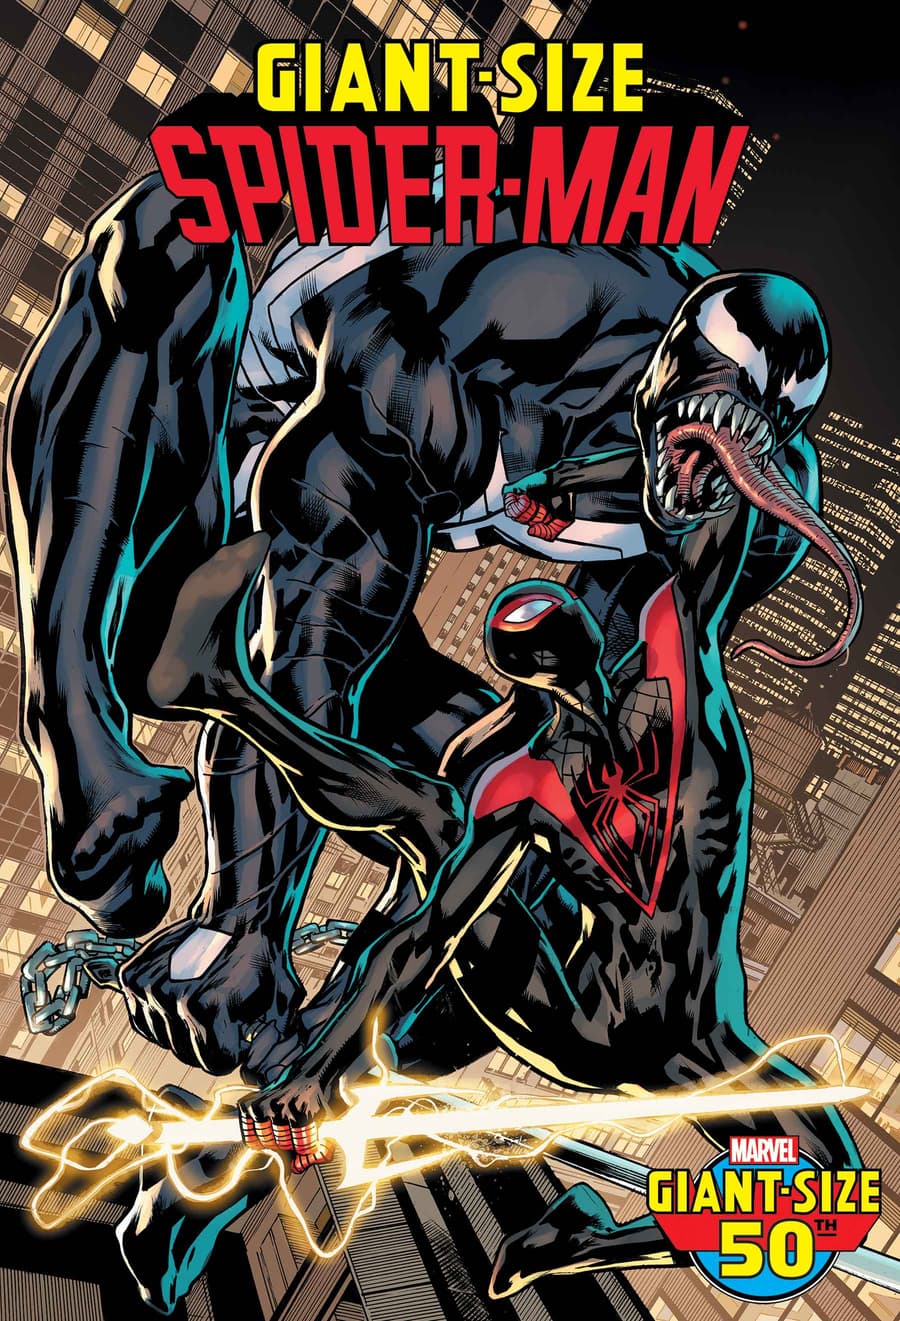 GIANT-SIZE SPIDER-MAN #1 cover by Bryan Hitch